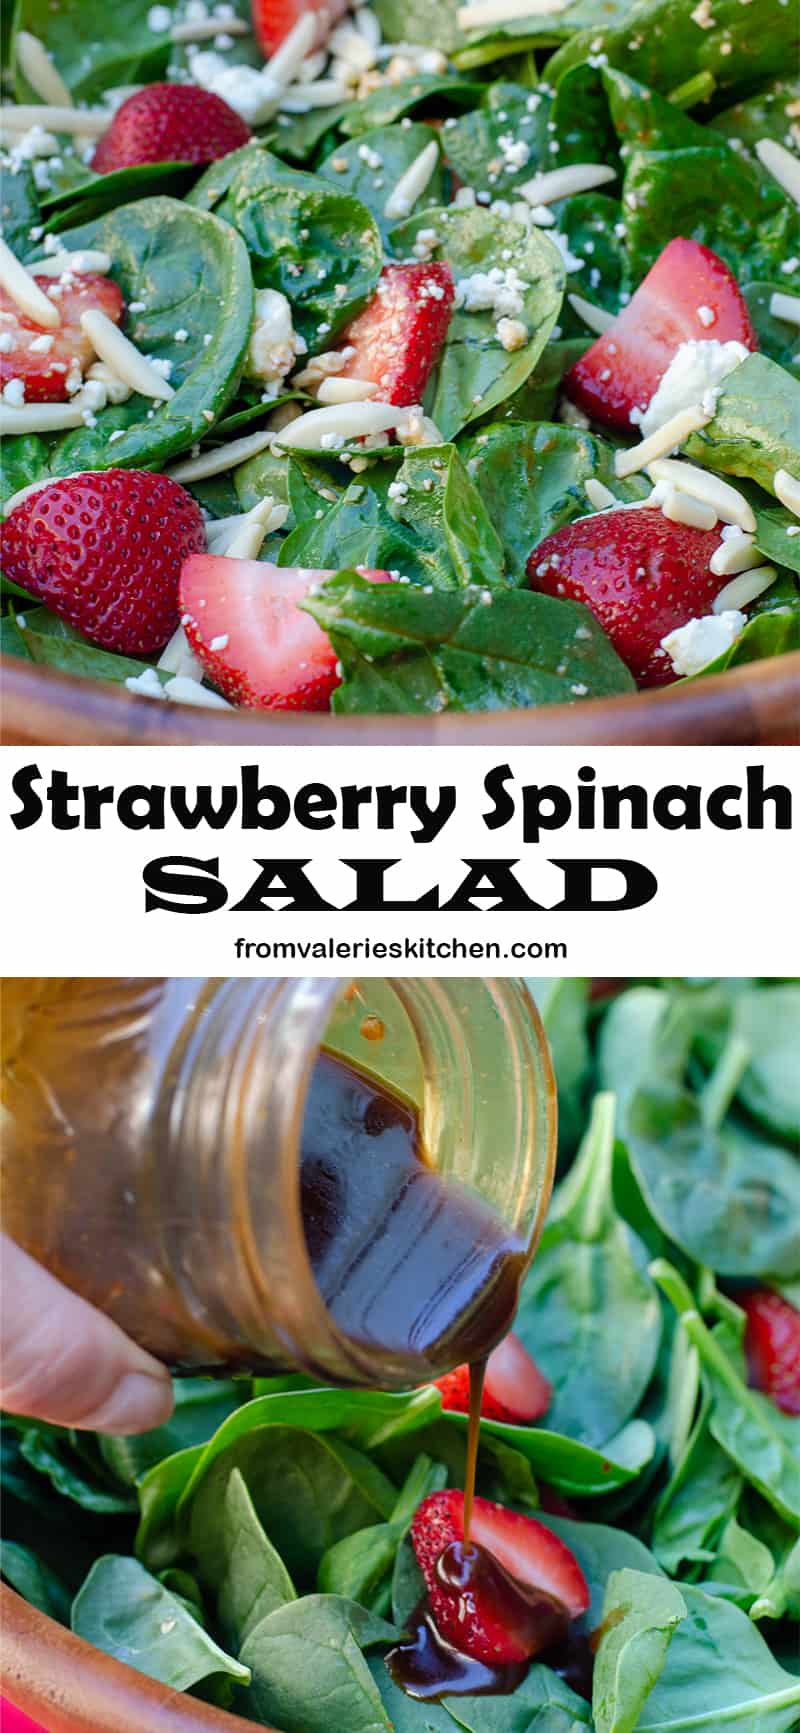 A two image vertical collage of Strawberry Spinach Salad with overlay text.